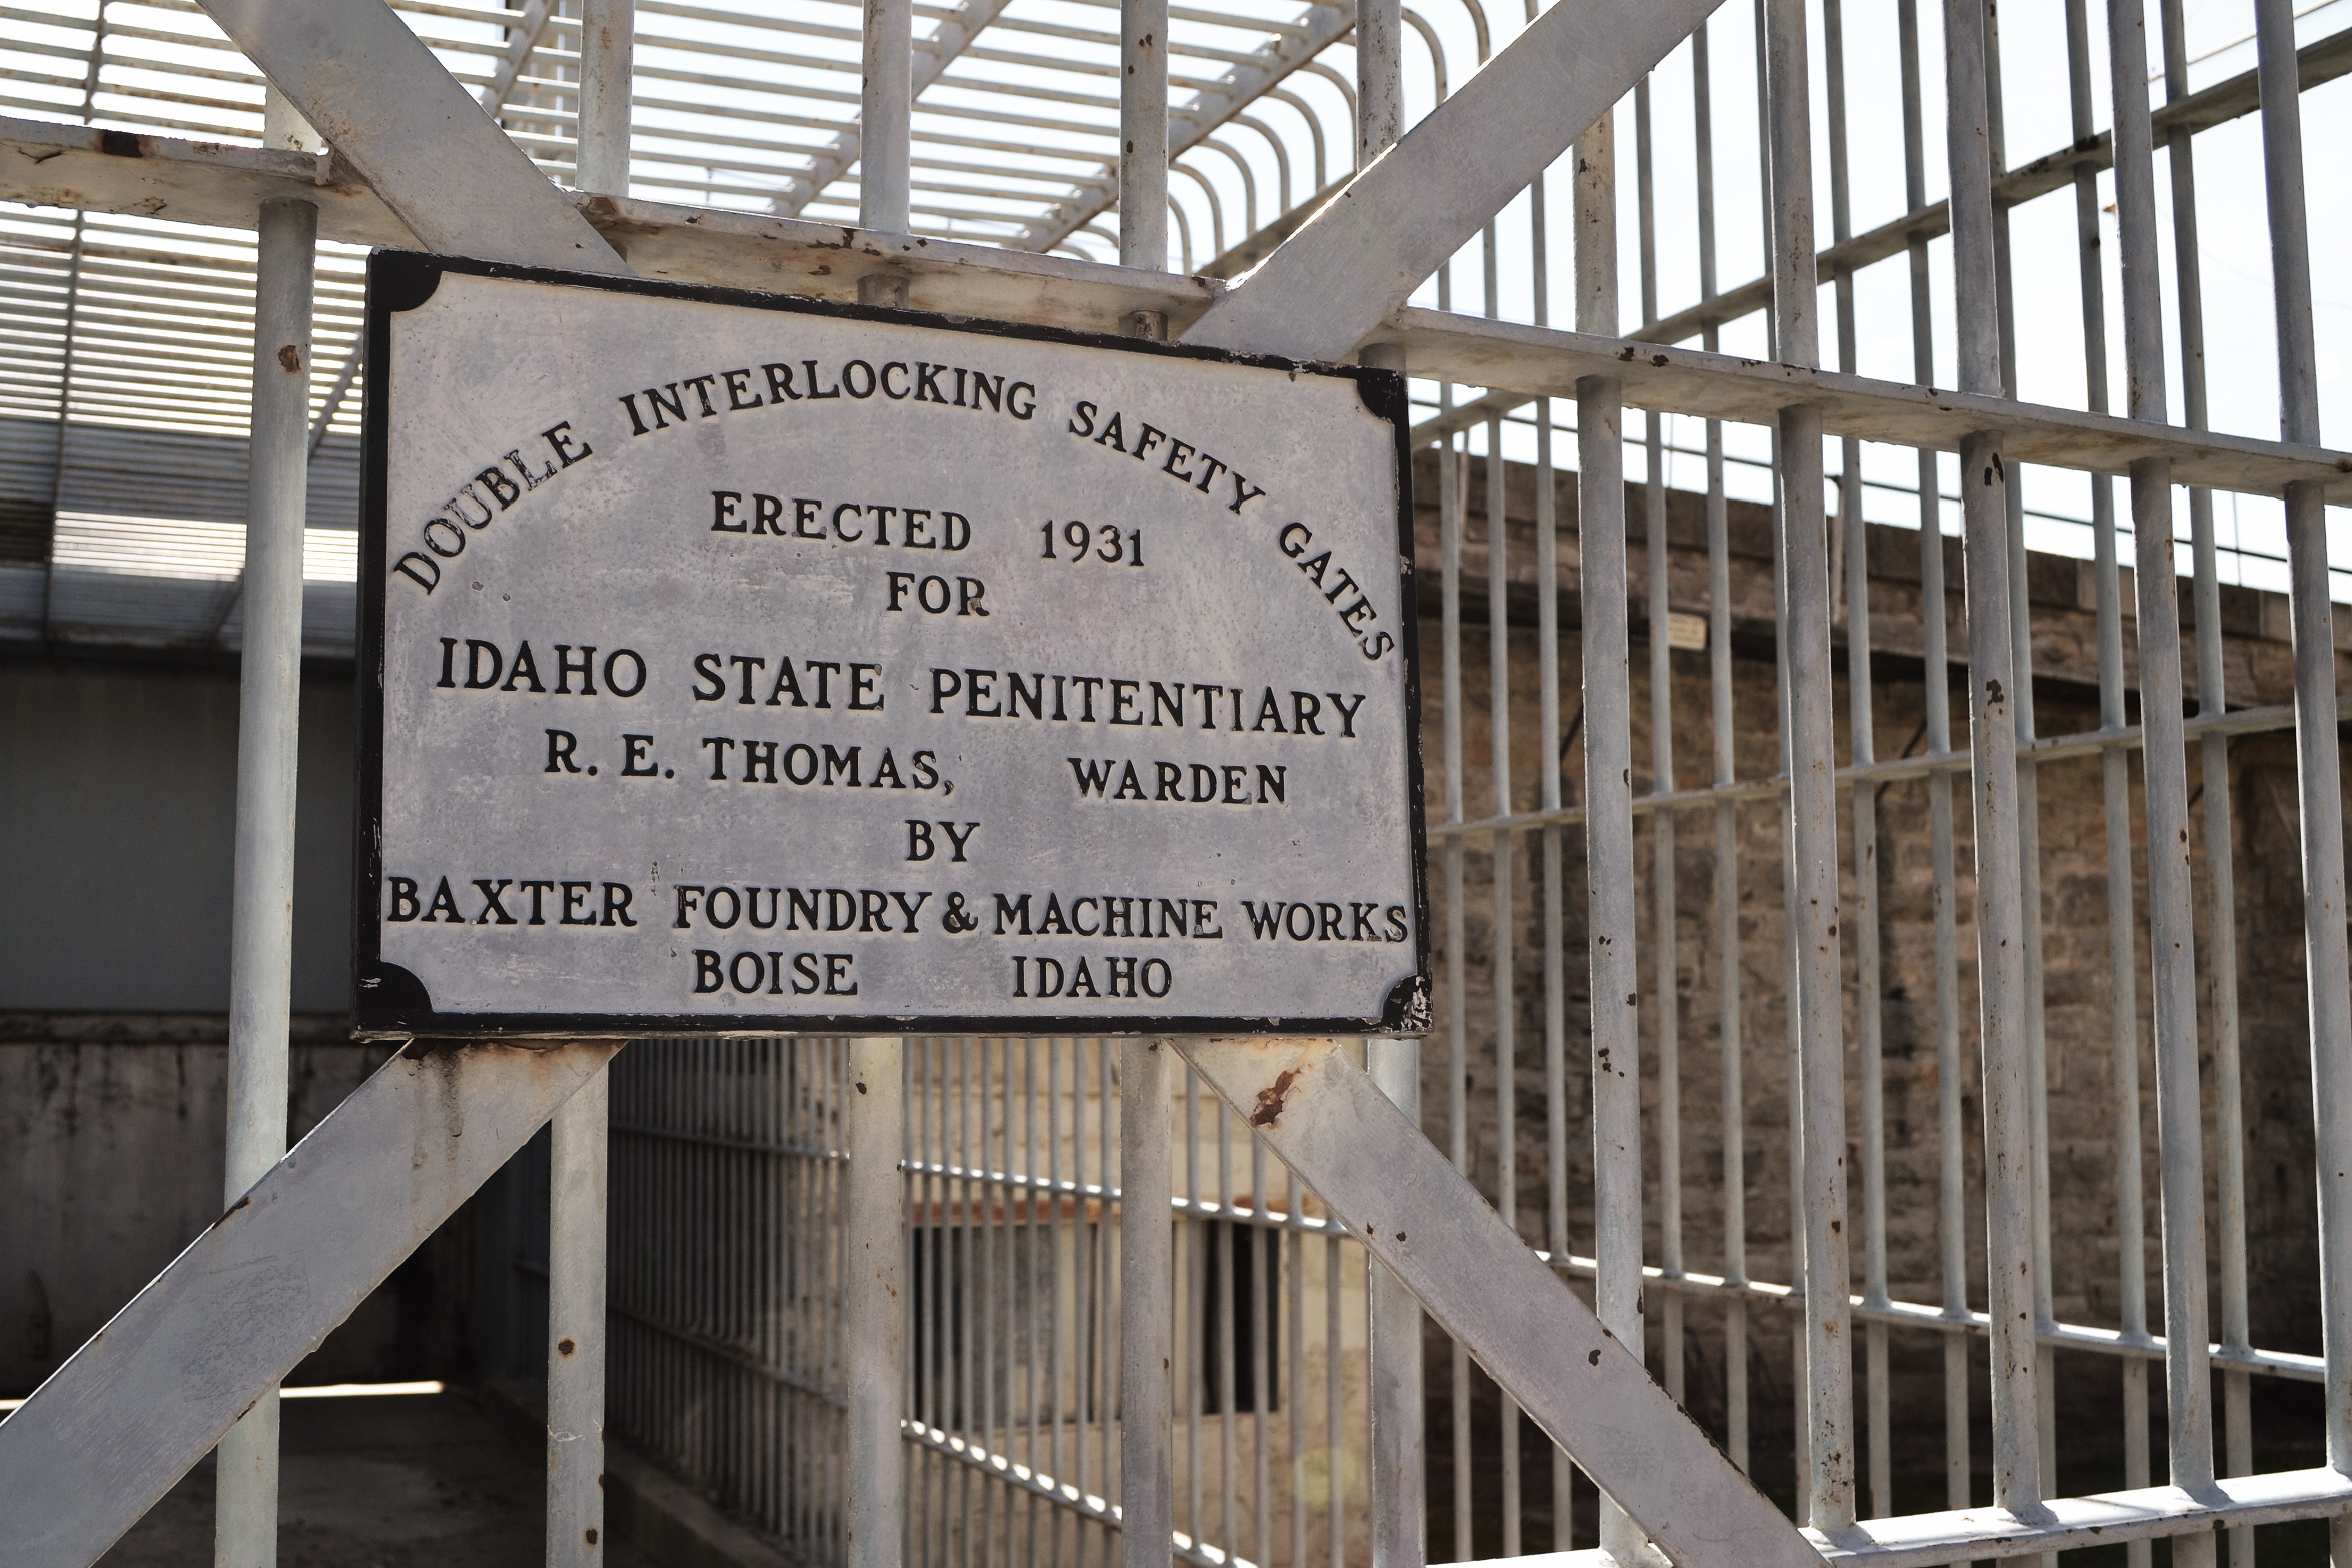 A sign at the entrance to the old prison photo